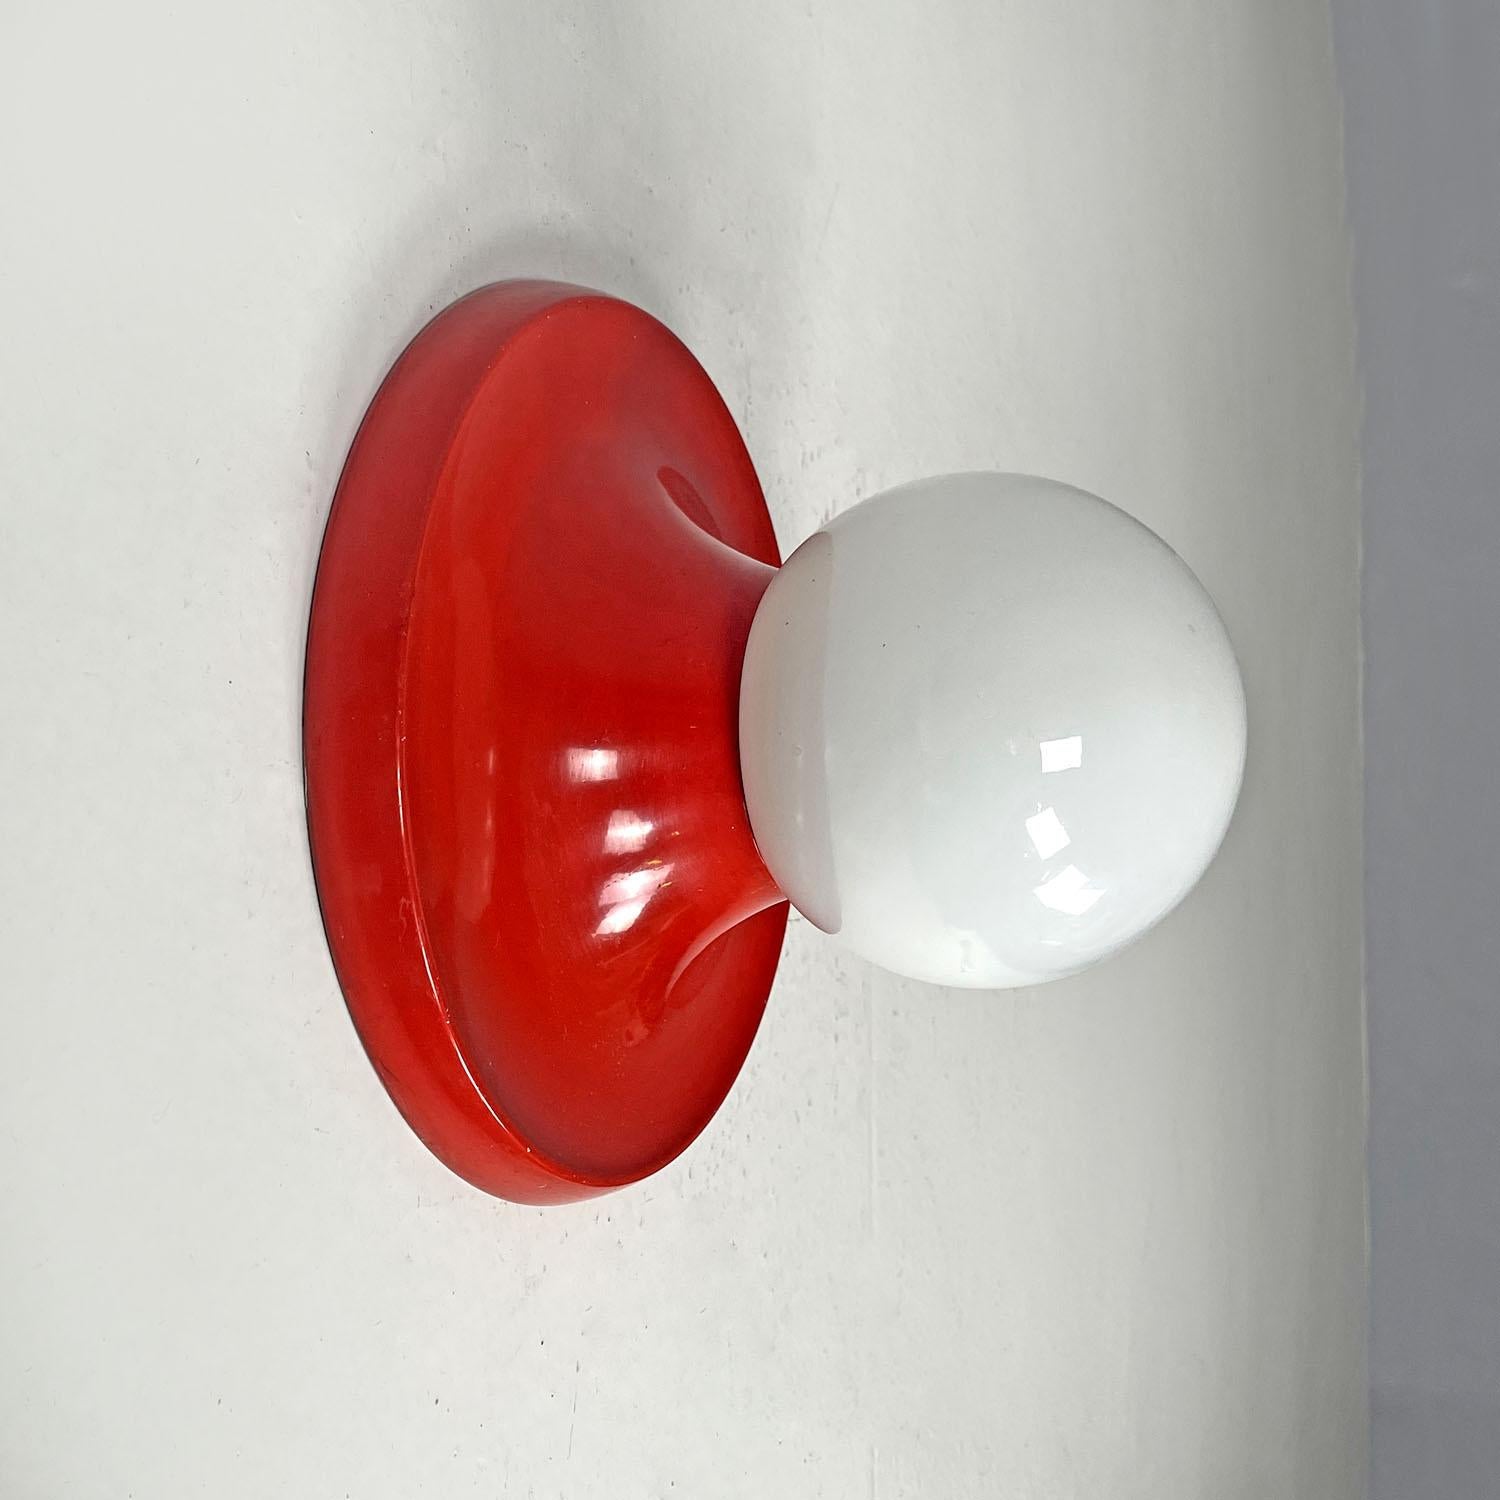 Italian mid-century modern Red wall lamp Light Ball Castiglioni for Flos, 1960s
Wall or ceiling lamp mod. Light Ball with spherical opal glass diffuser. The structure of the round base is in red enamelled metal.
Produced by Flos in 1960s and